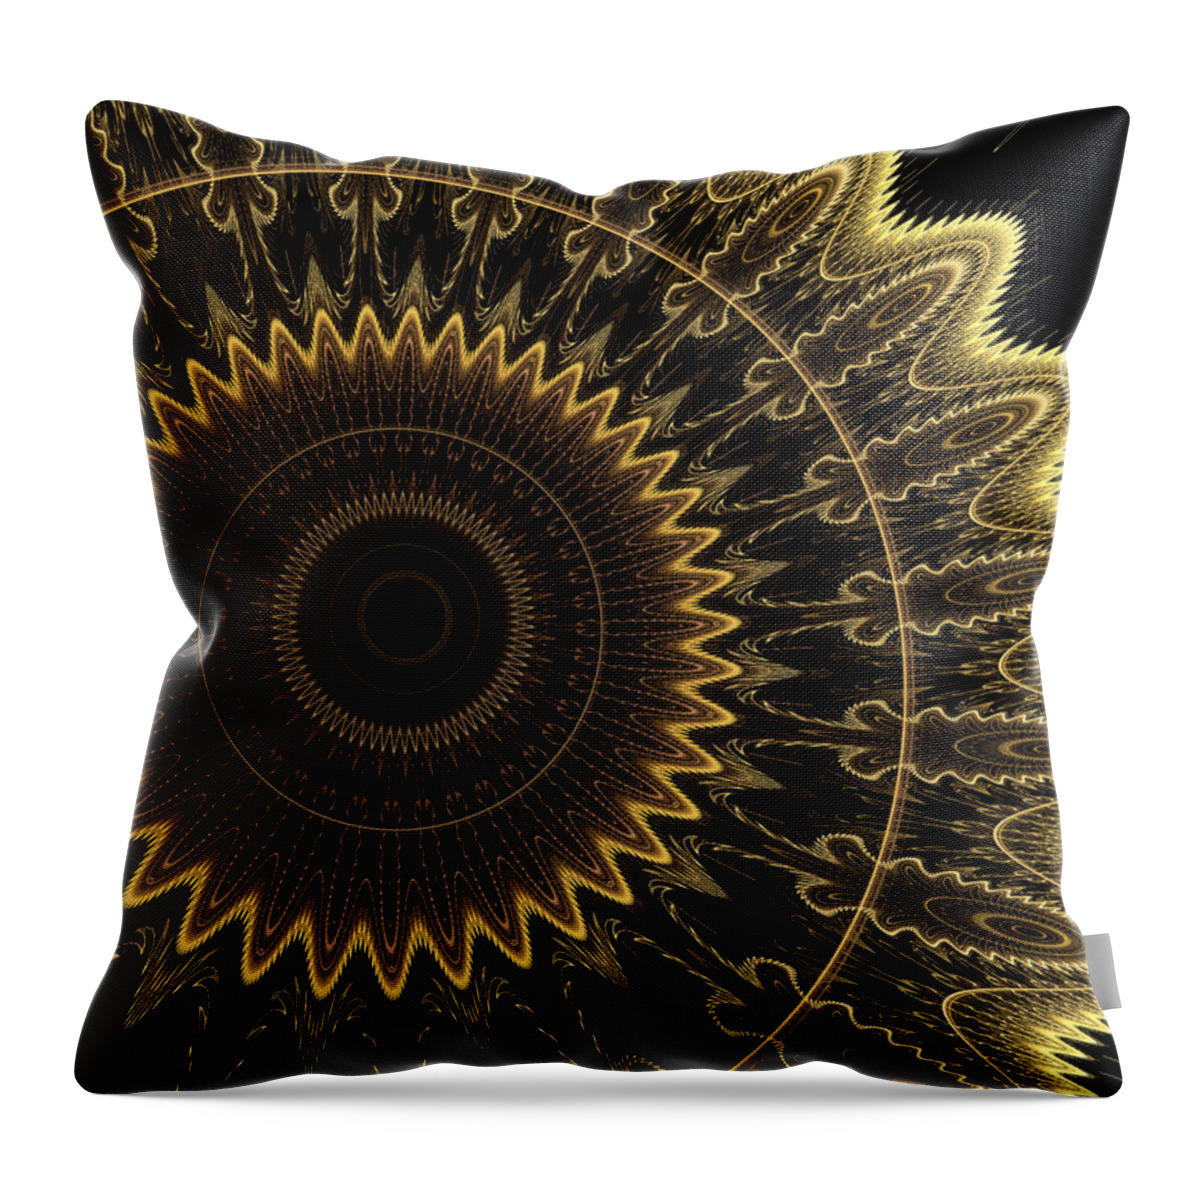 Vic Eberly Throw Pillow featuring the digital art Heart of the Sun by Vic Eberly